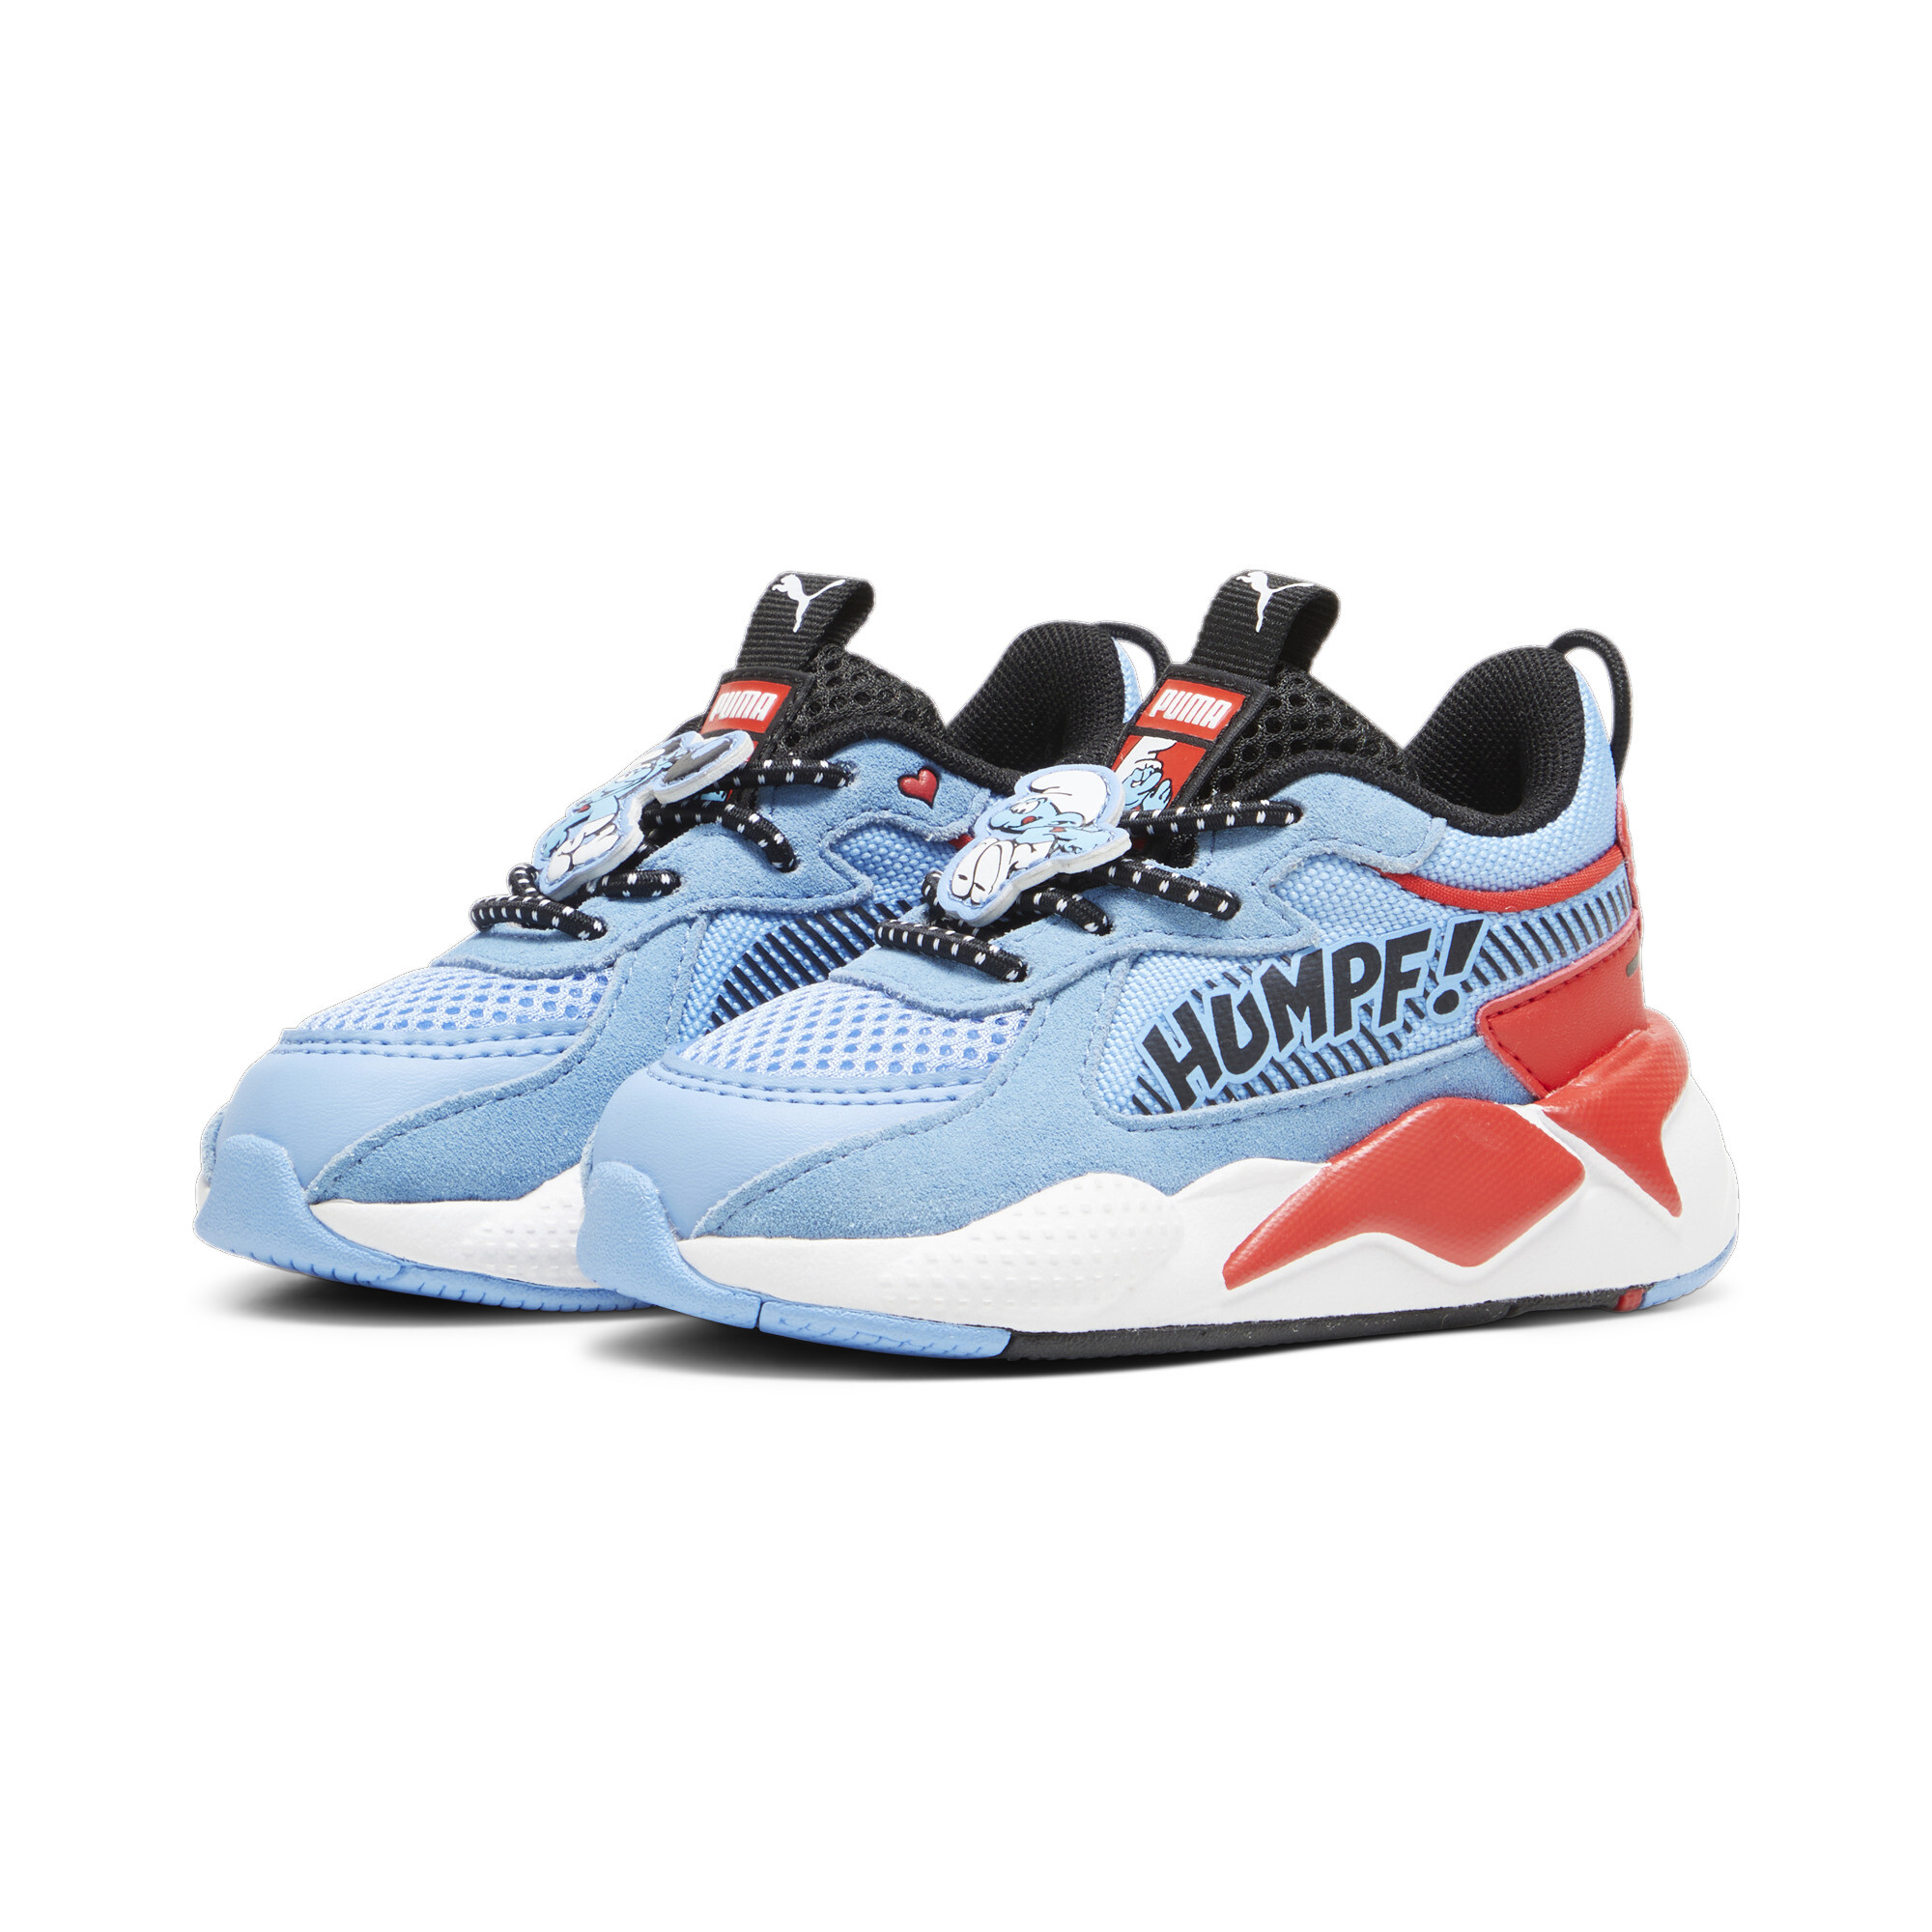 Kids' PUMA X THE SMURFS RS-X Toddlers' Sneakers In Blue, Size EU 24